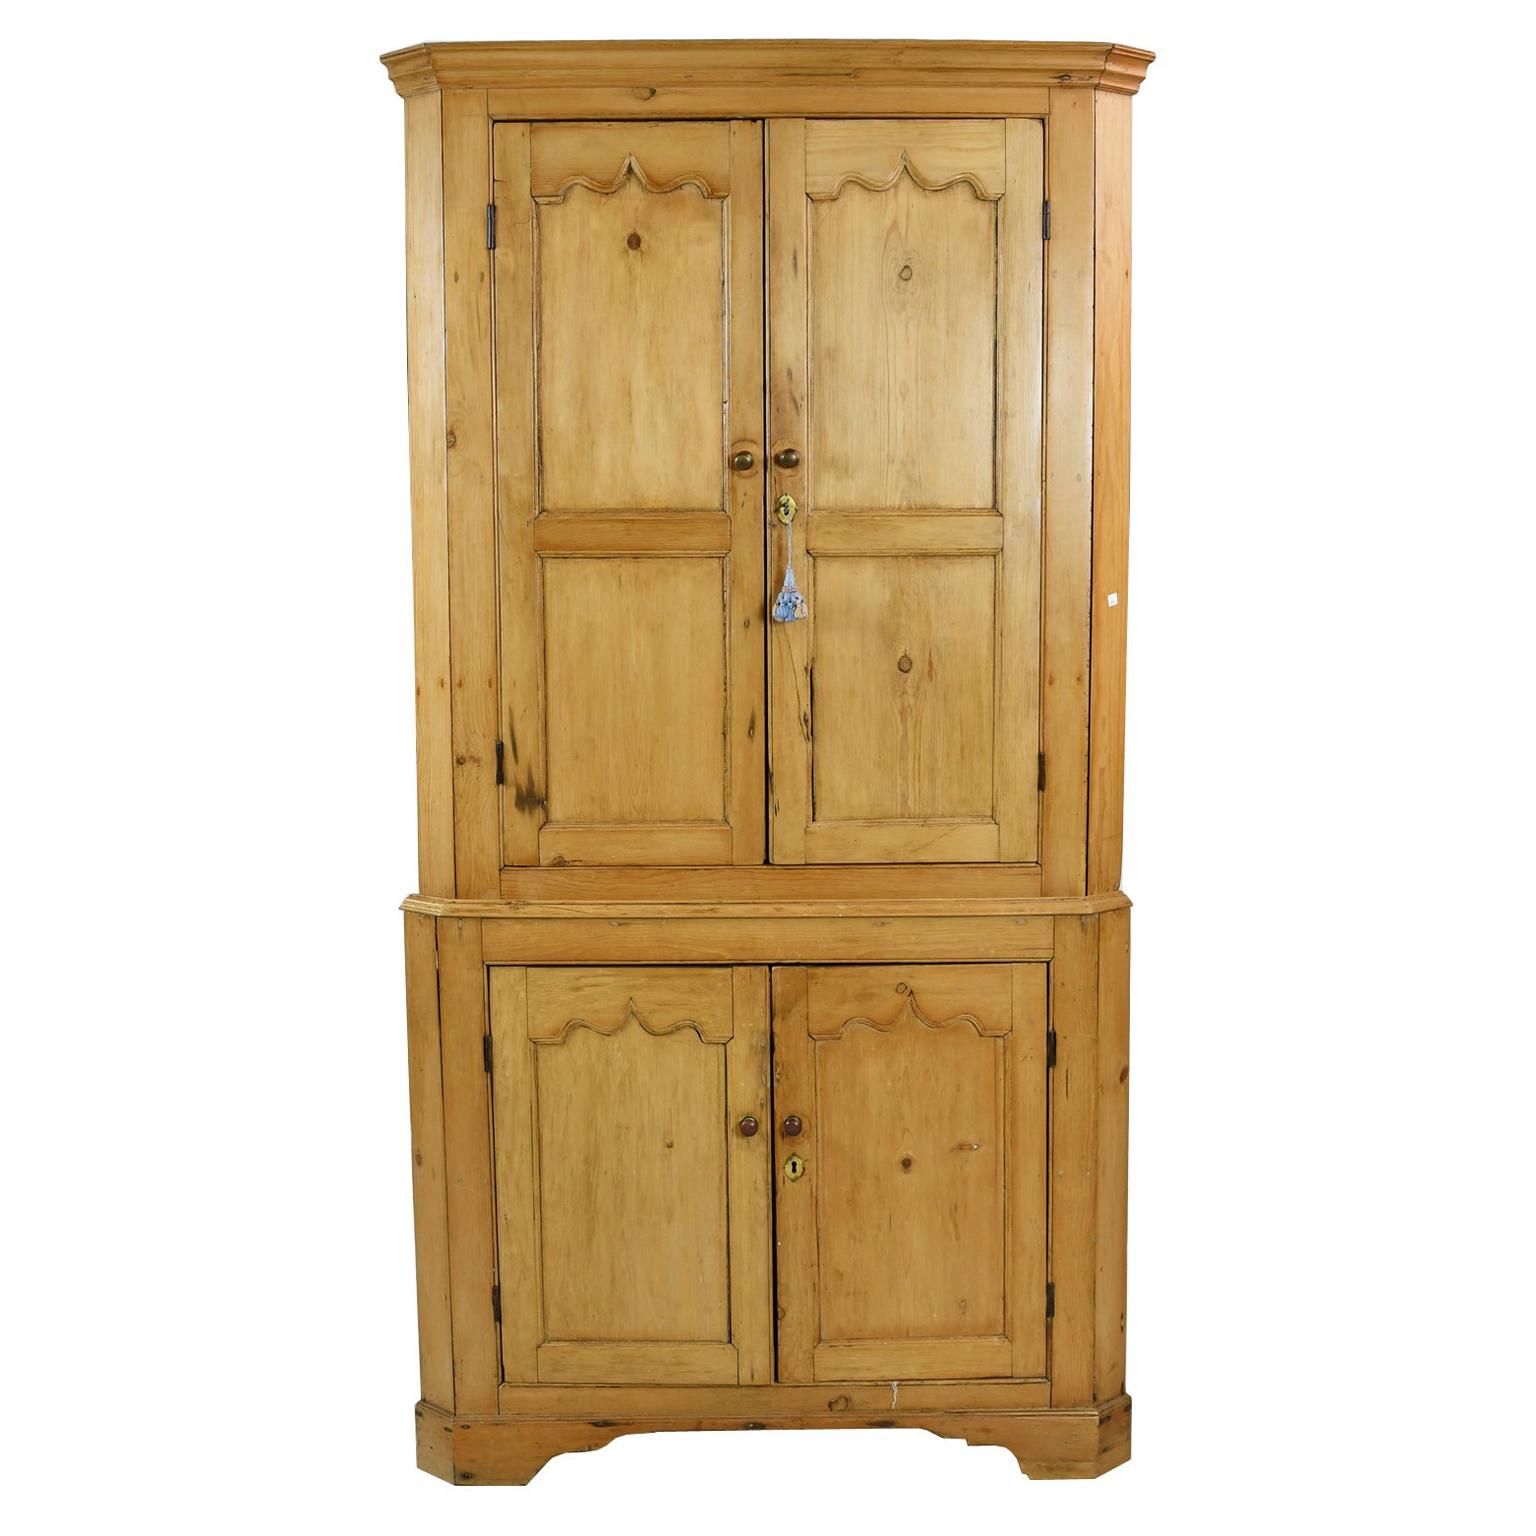 Antique Tall English Four-Door Corner Cupboard/ Cabinet in Light-Colored Pine For Sale